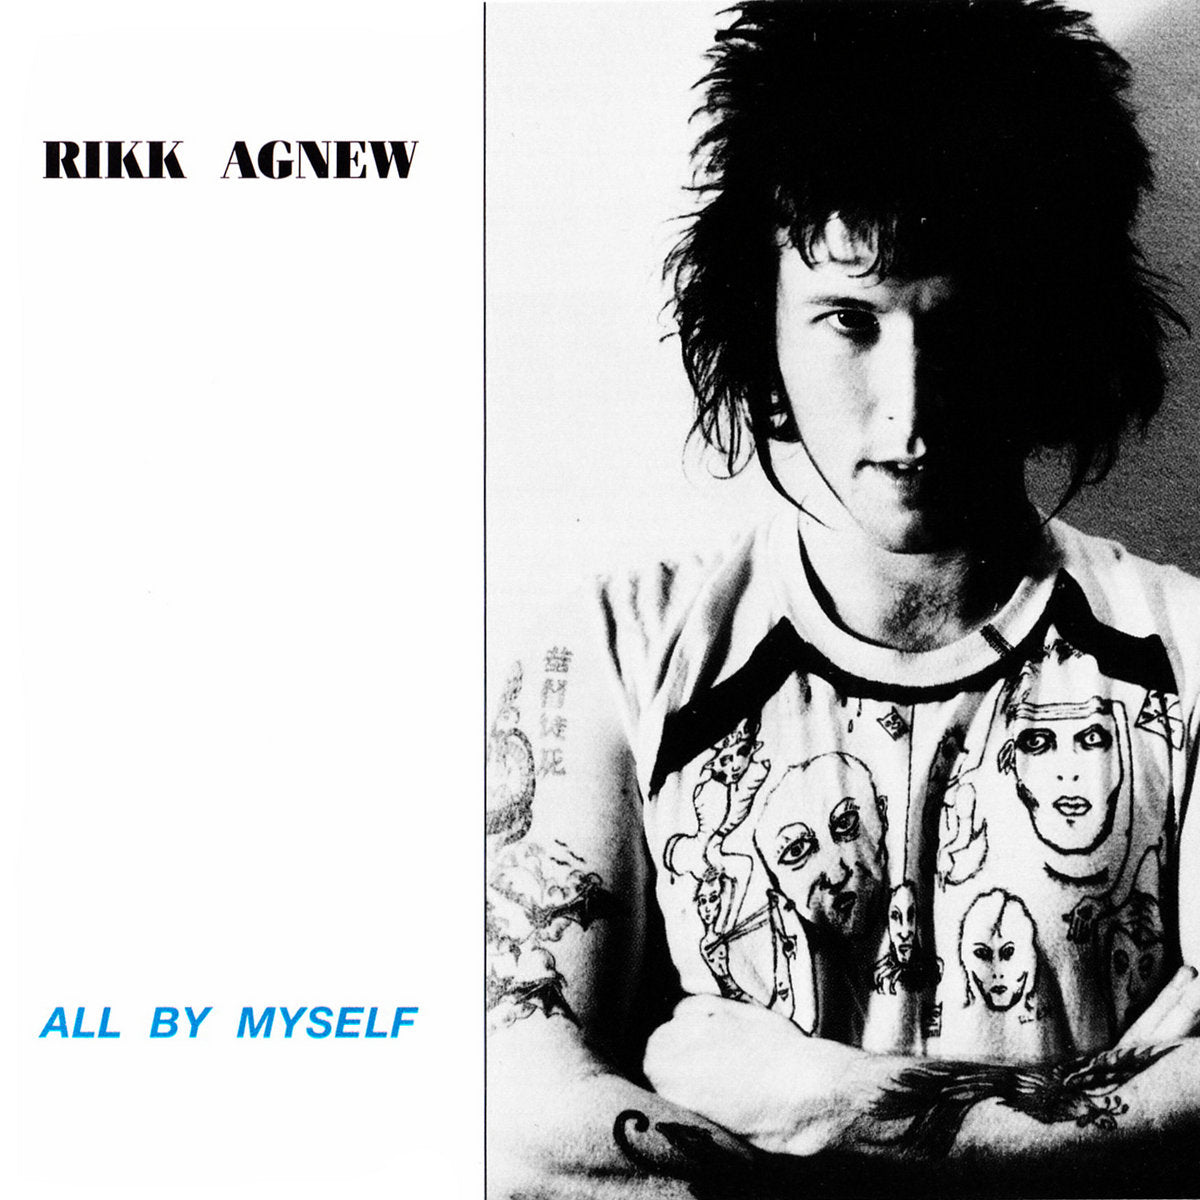 Agnew, Rikk - All By Myself [COLOR VINYL MARKED DOWN] - New LP